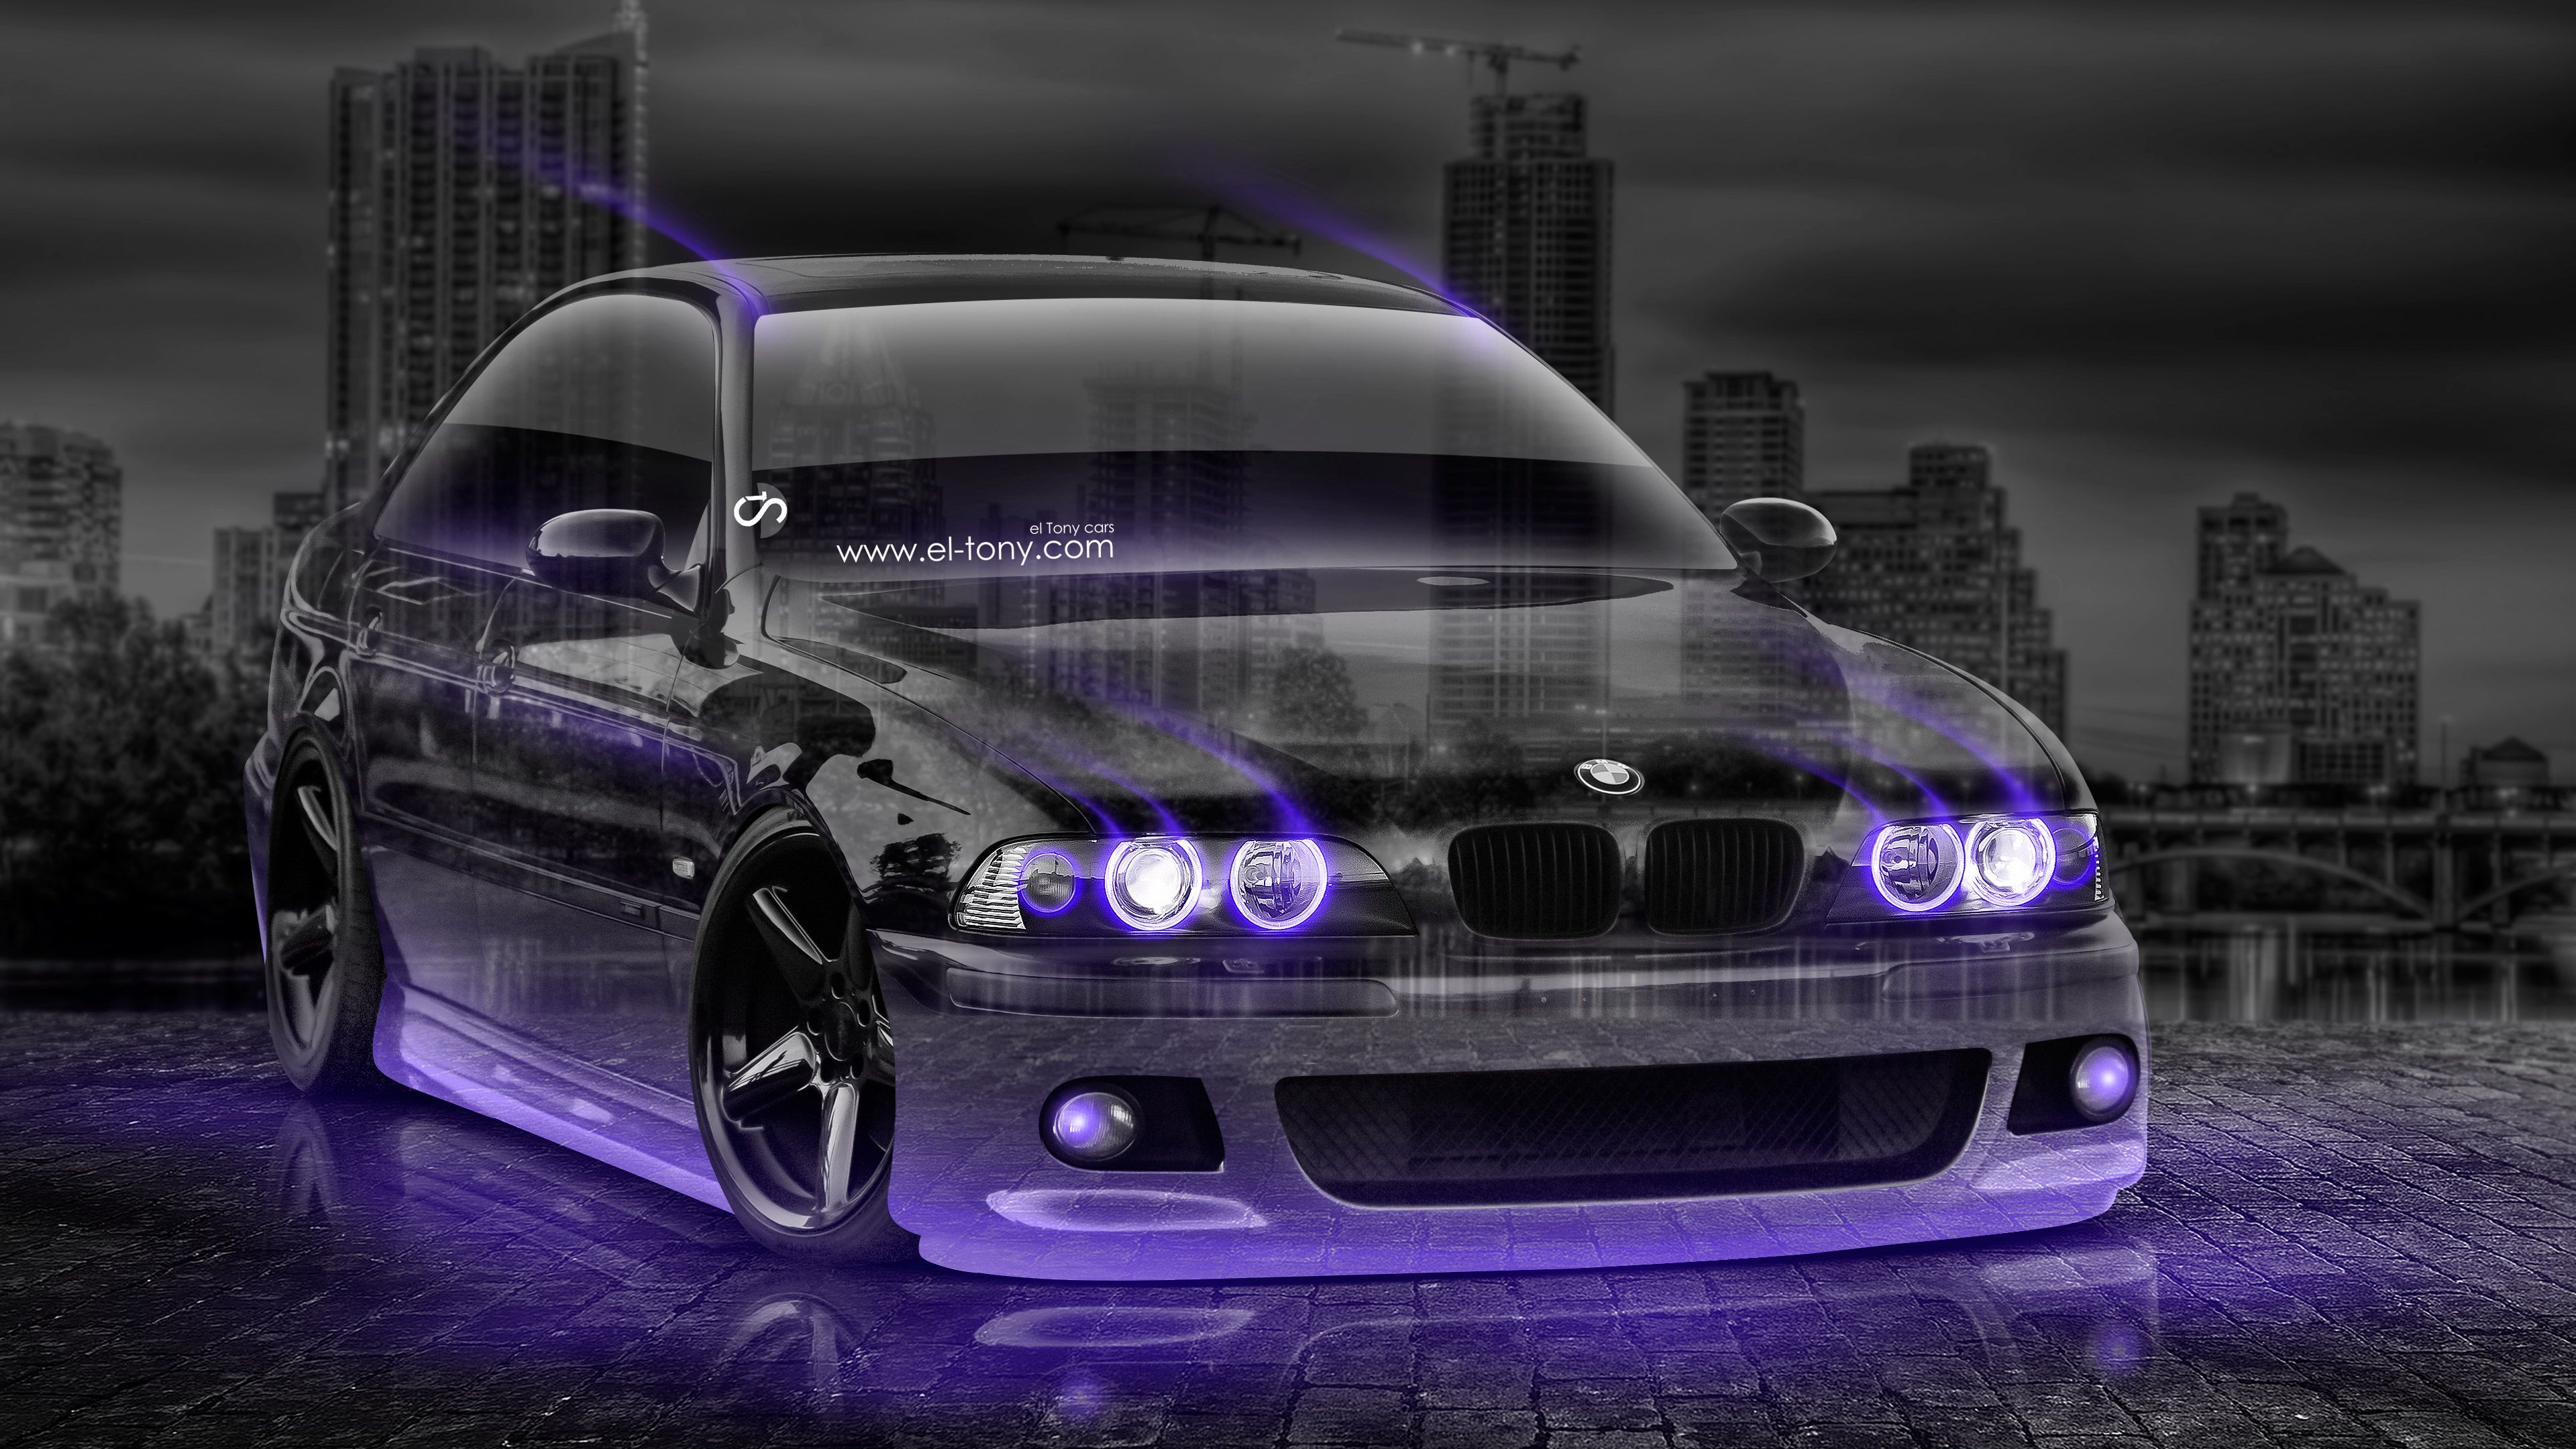 BMW M5 Tuning 3D Crystal City Car 2015 Violet Neon Effects HD Wallpaper Design By Tony Kokhan